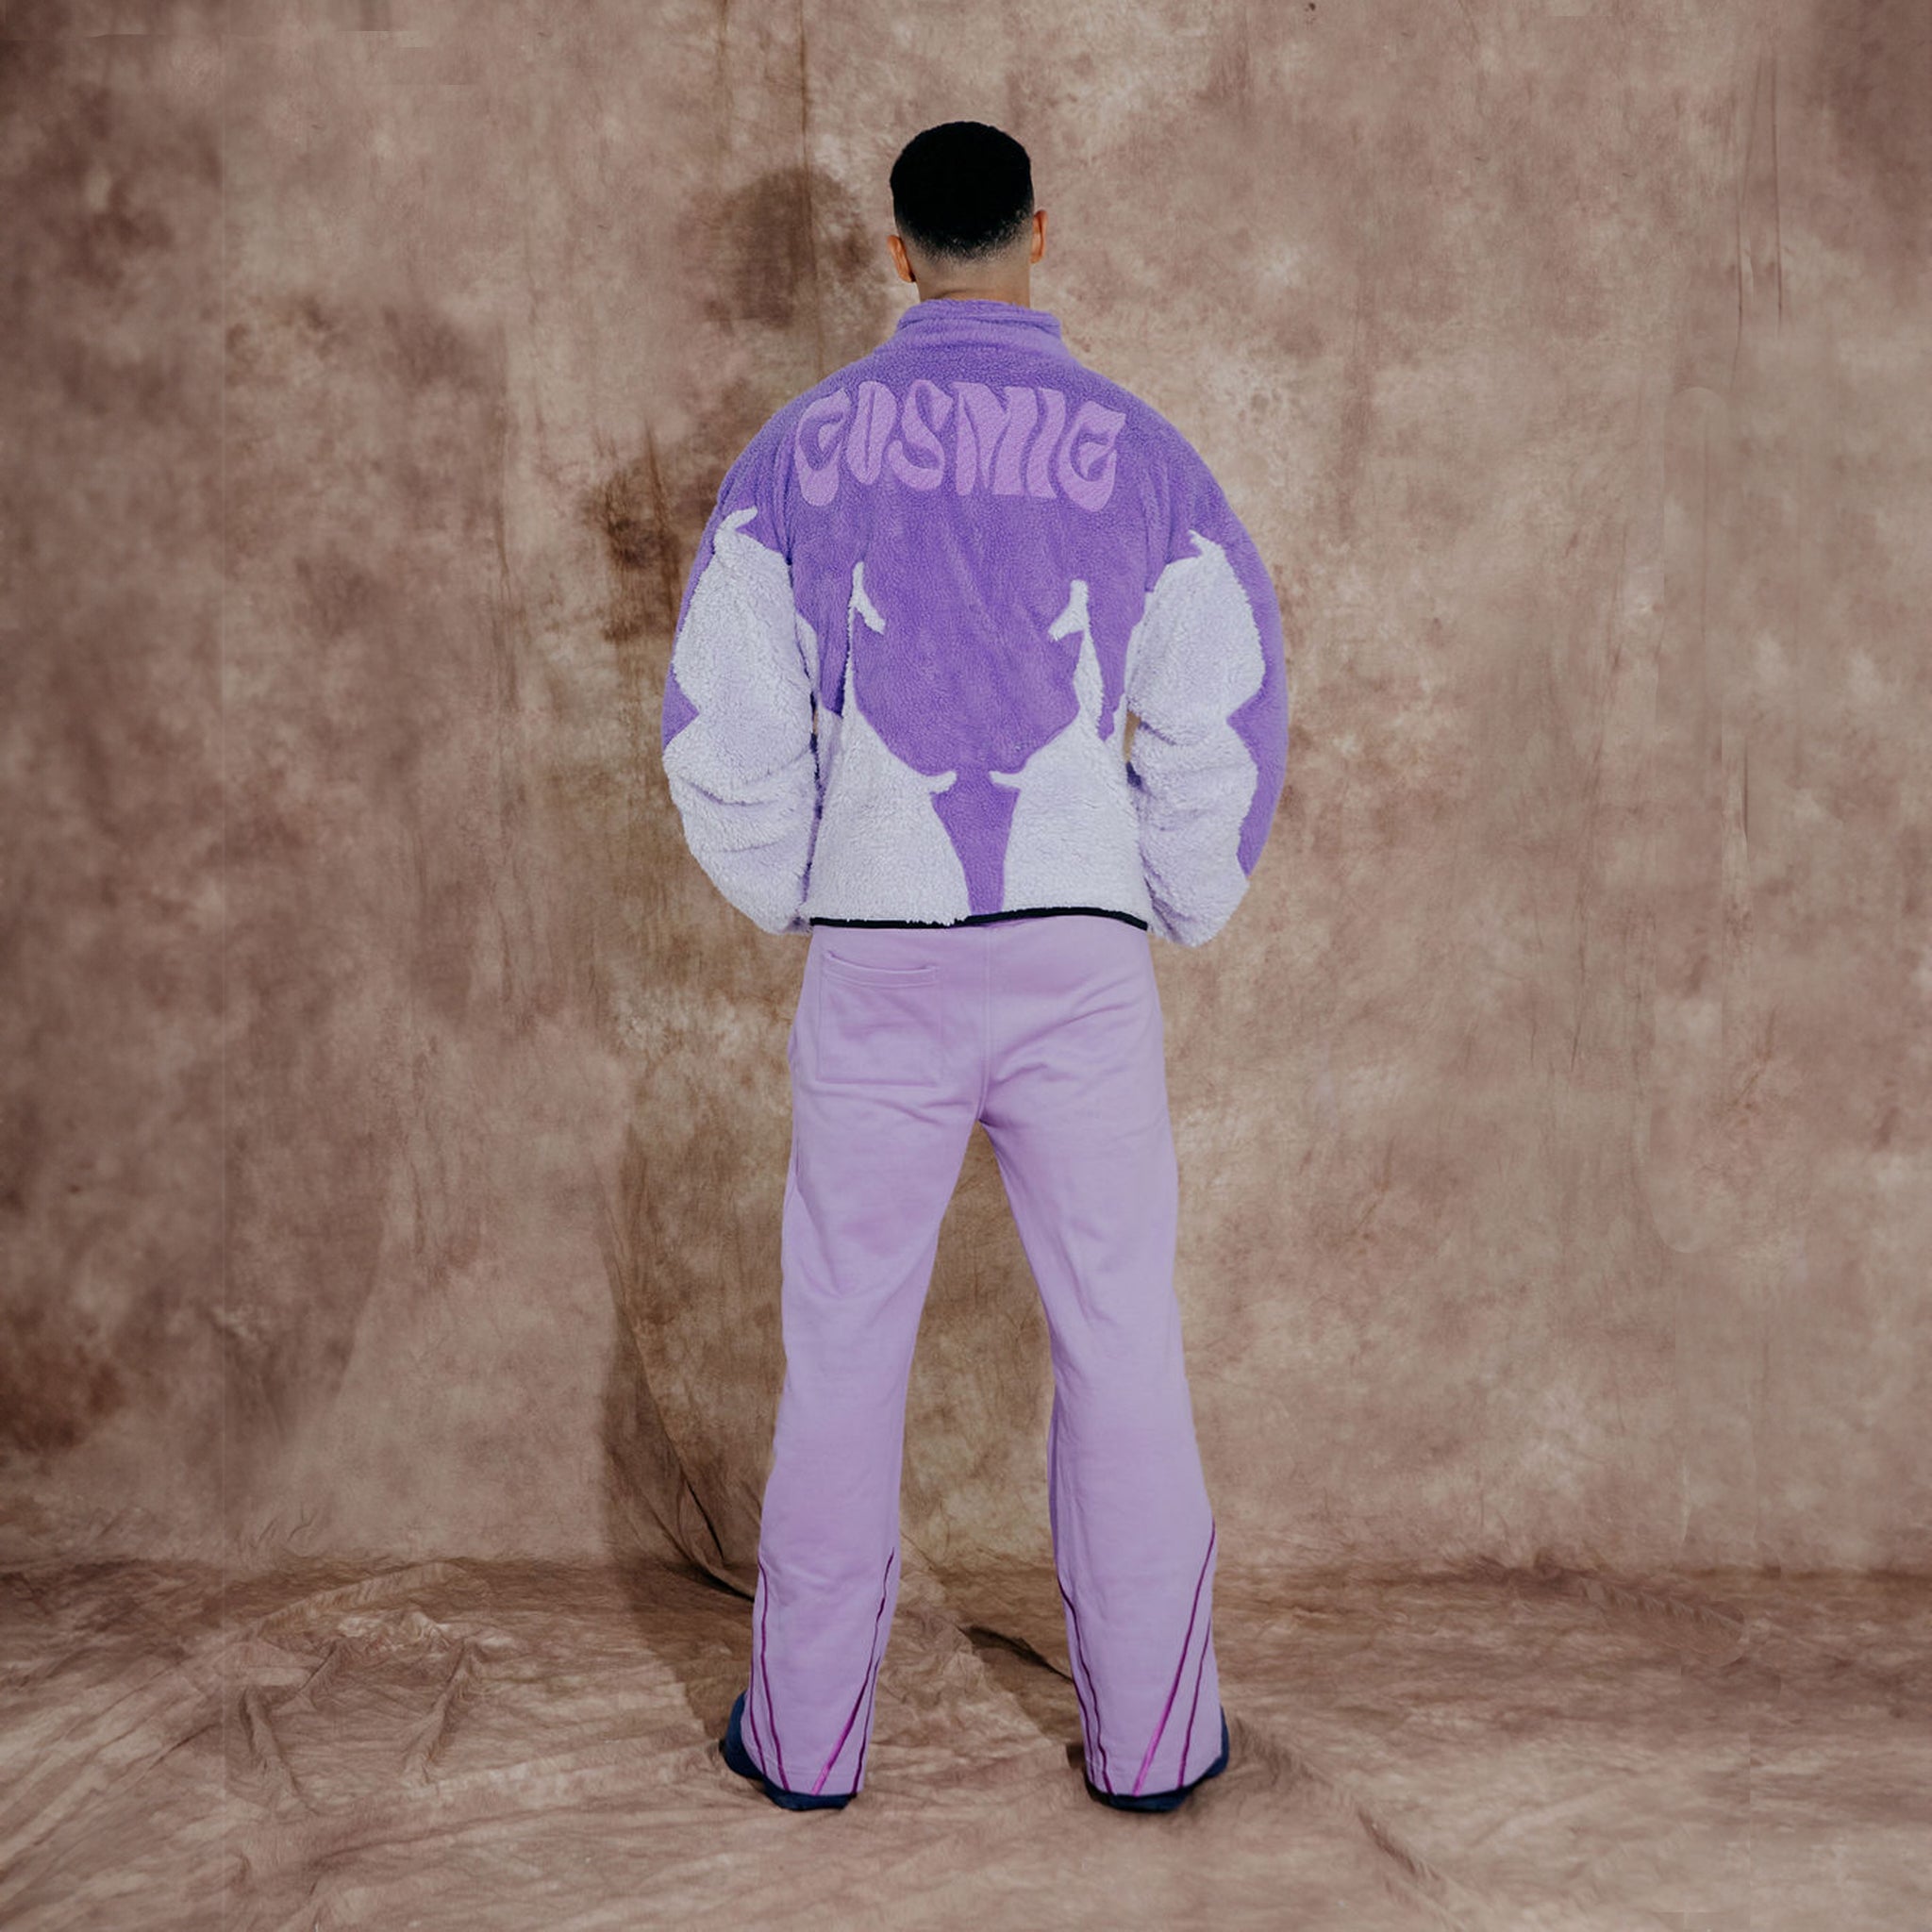 Cosmic the Oasis three-color purple sherpa zip up with extended sleeves can be worn as an oversized shirt layer or outerwear.  Dramatic curved design with Cosmic logo across the back.